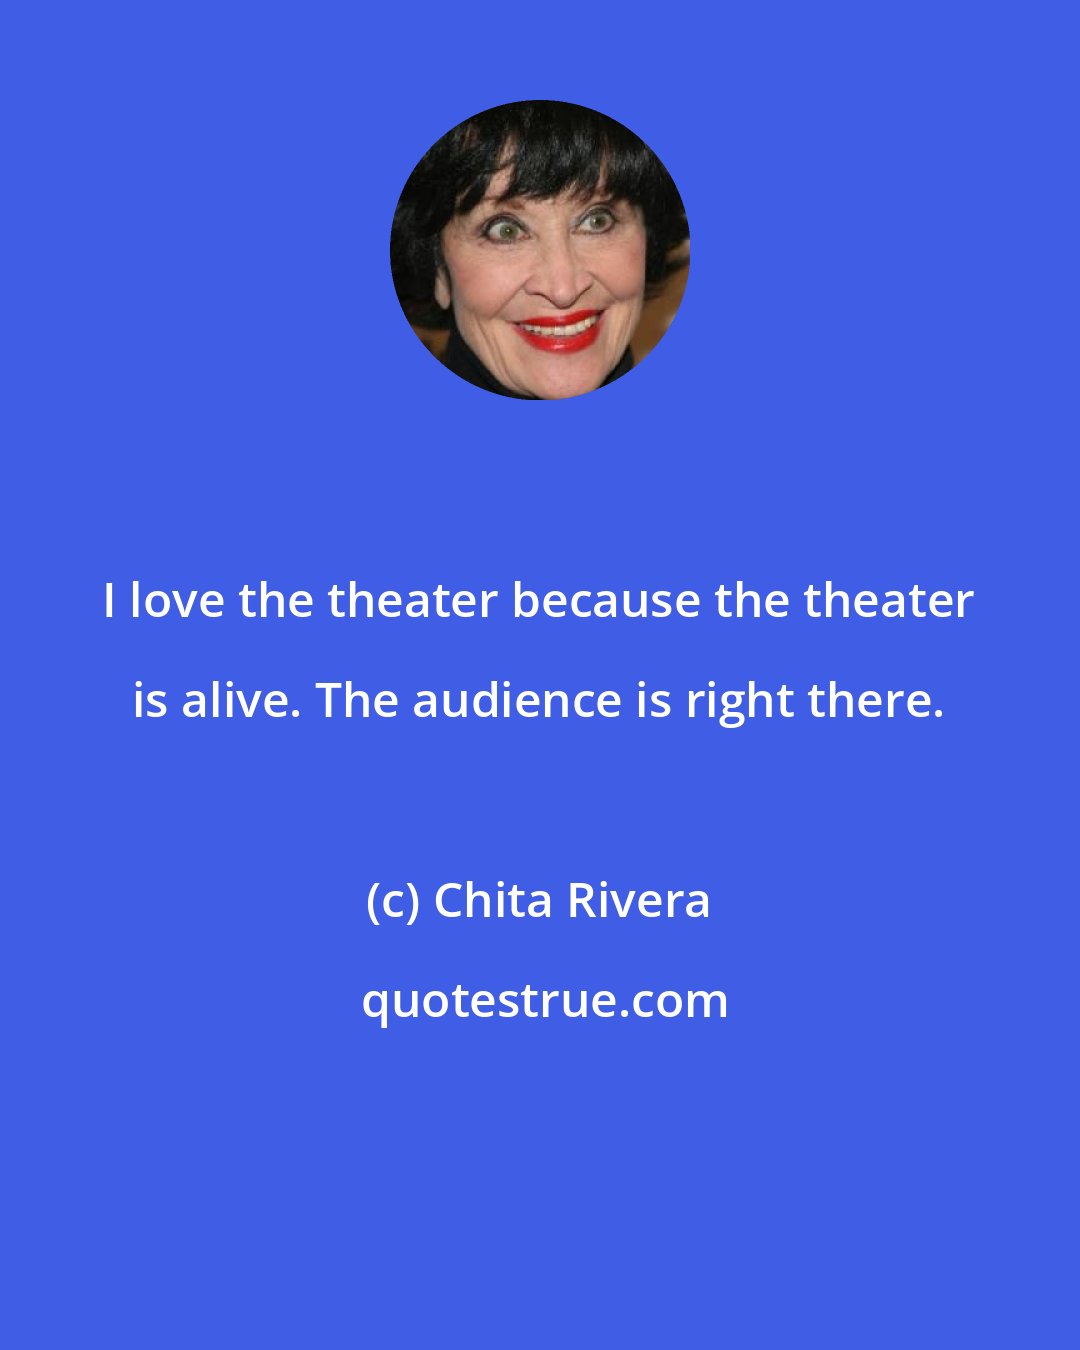 Chita Rivera: I love the theater because the theater is alive. The audience is right there.